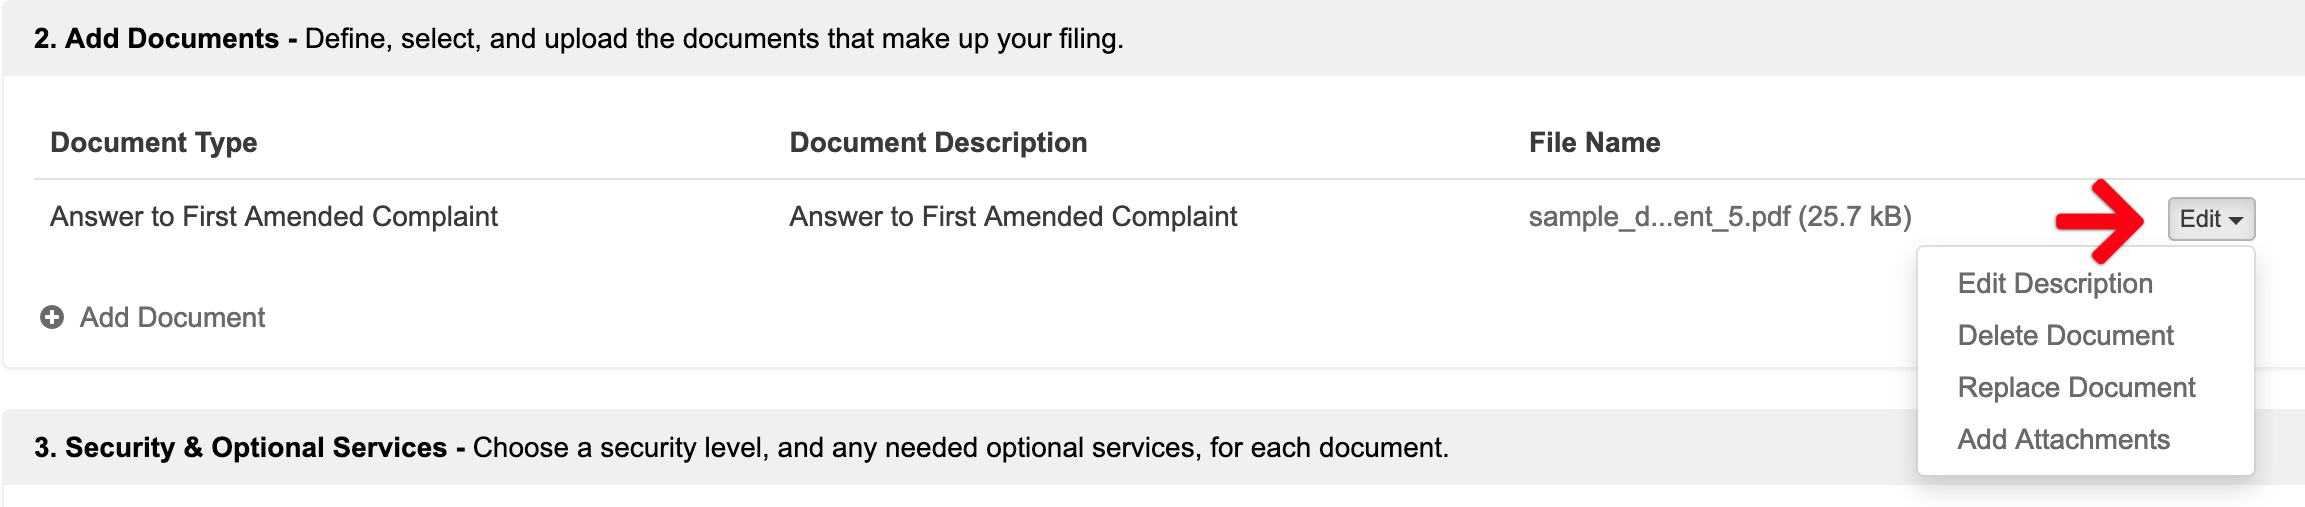 change or delete documents in rejected filings